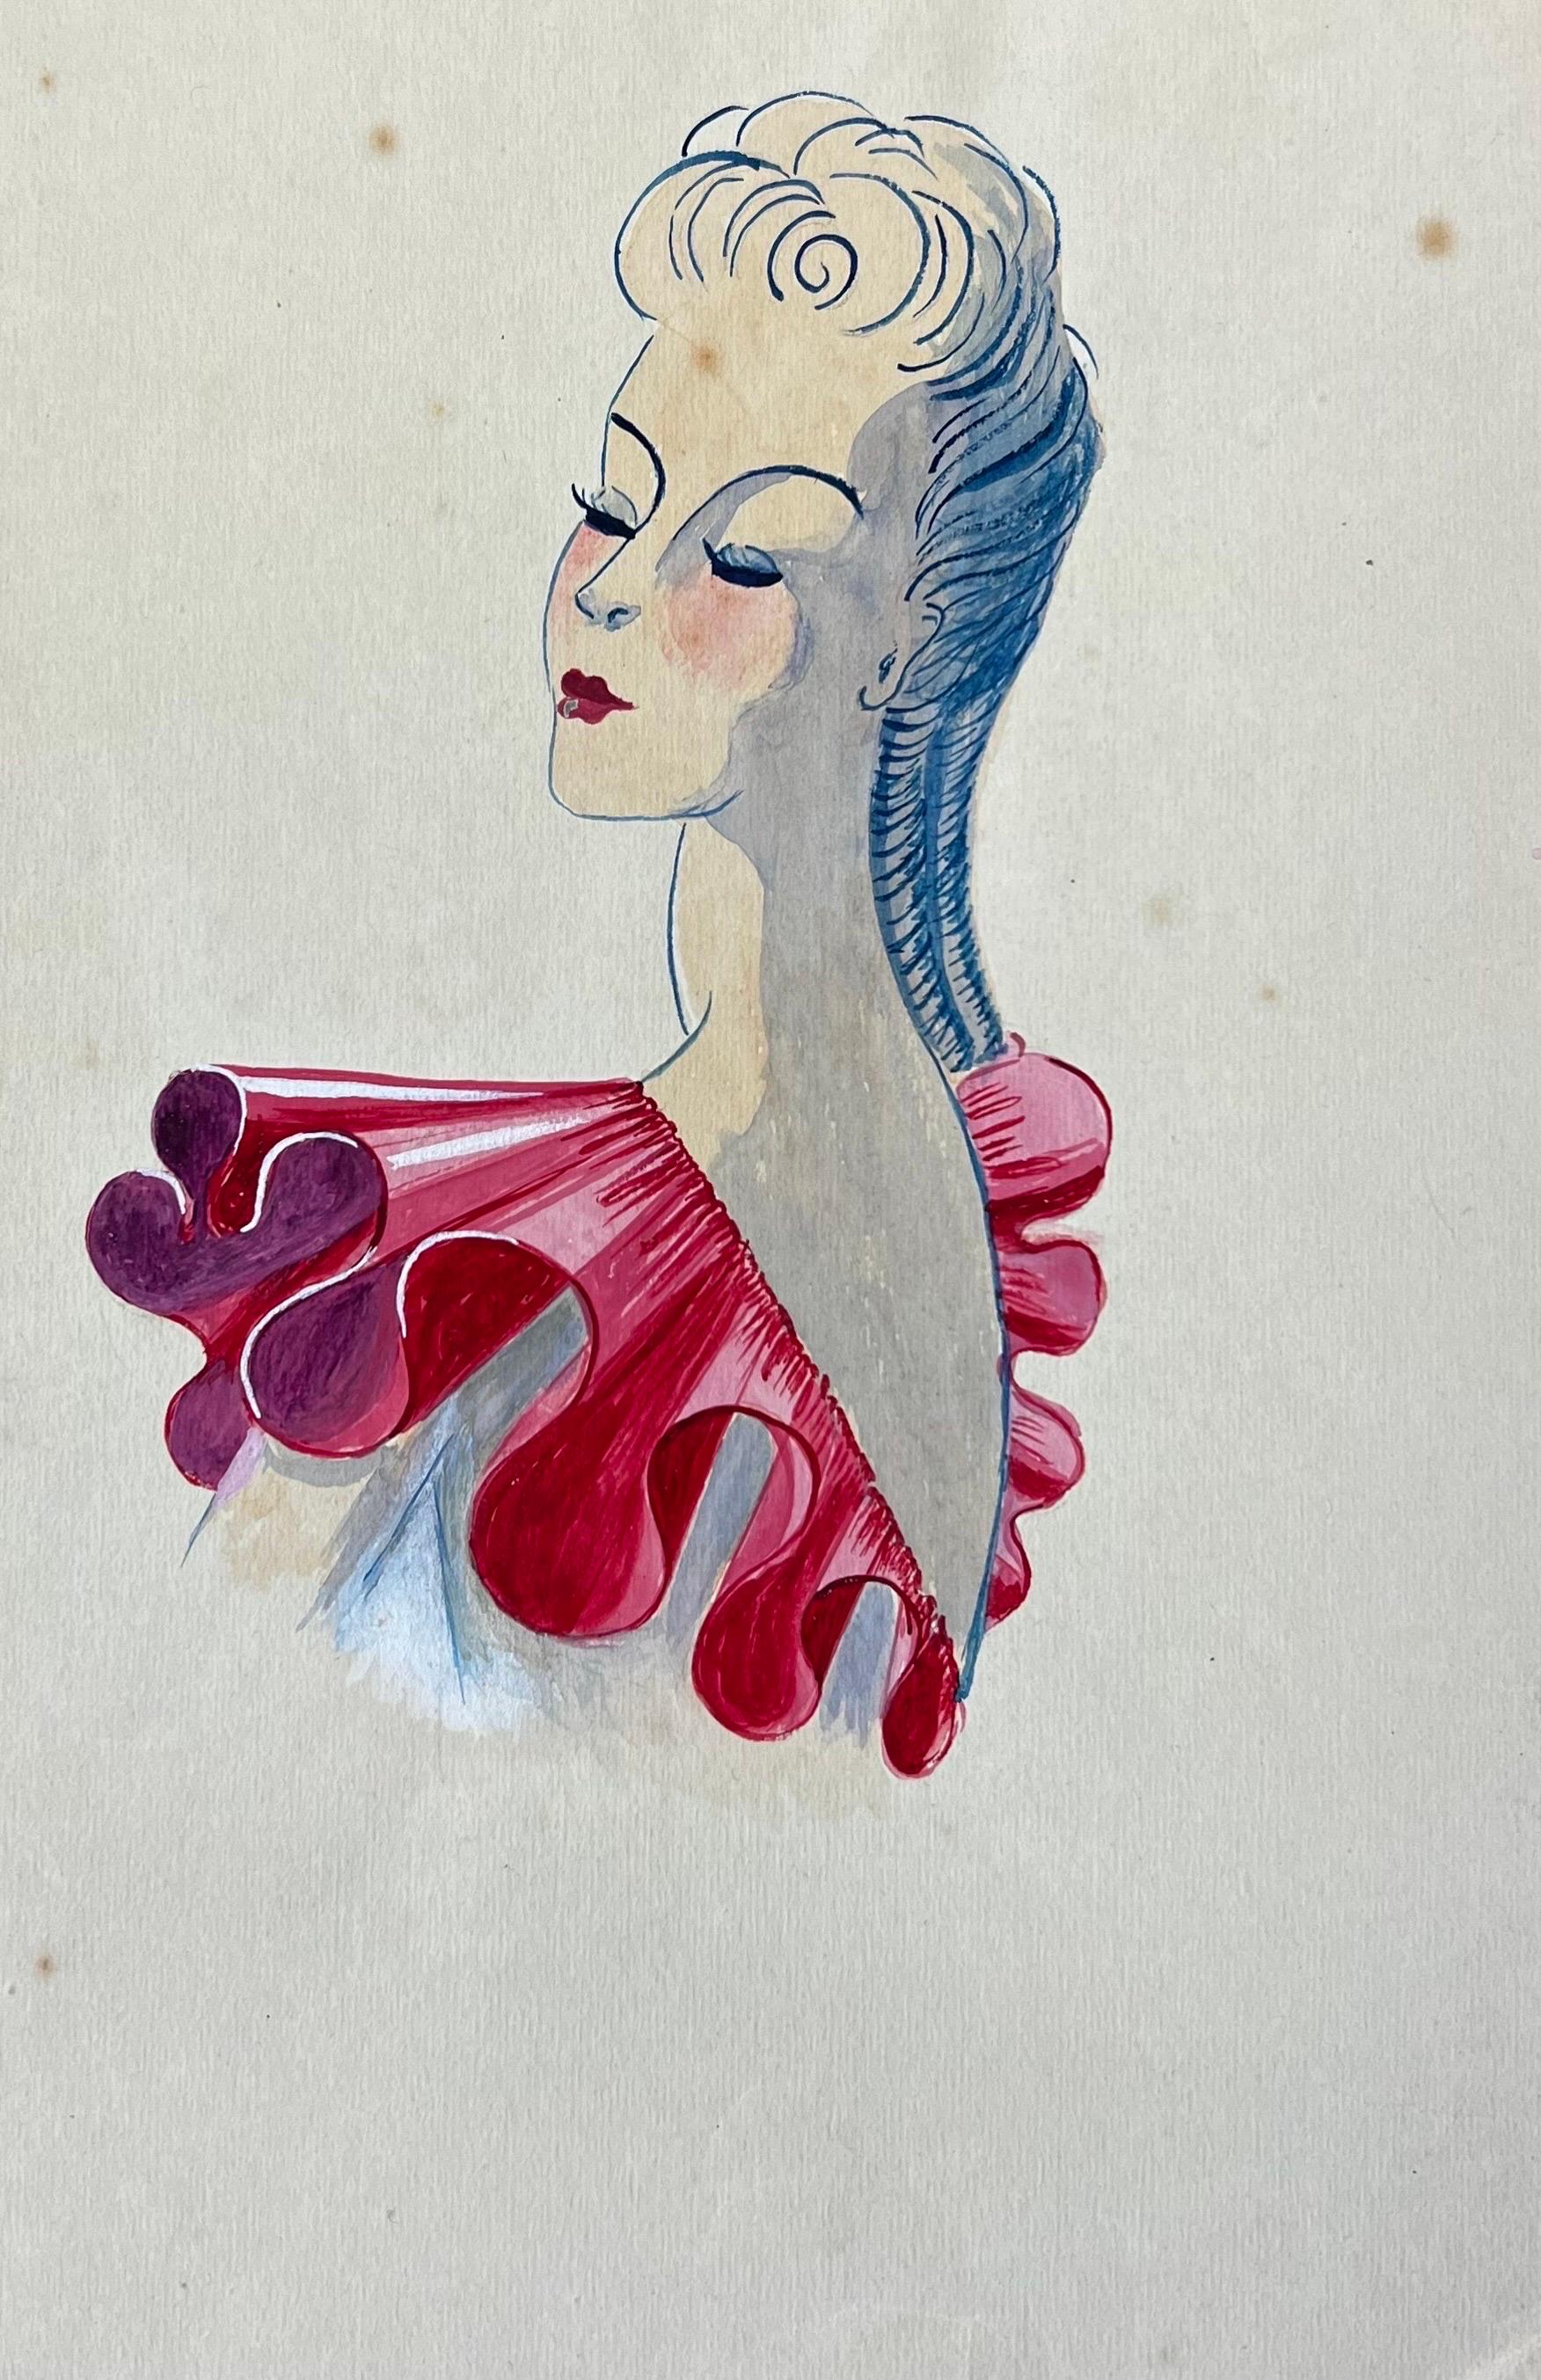 Very stylish, unique and original 1940's fashion design by French illustrator Geneviève Thomas.

The painting, executed in gouache and pencil.

The sketch is original, vintage and measures unframed 9 x 6.25 inches. It will make wonderful